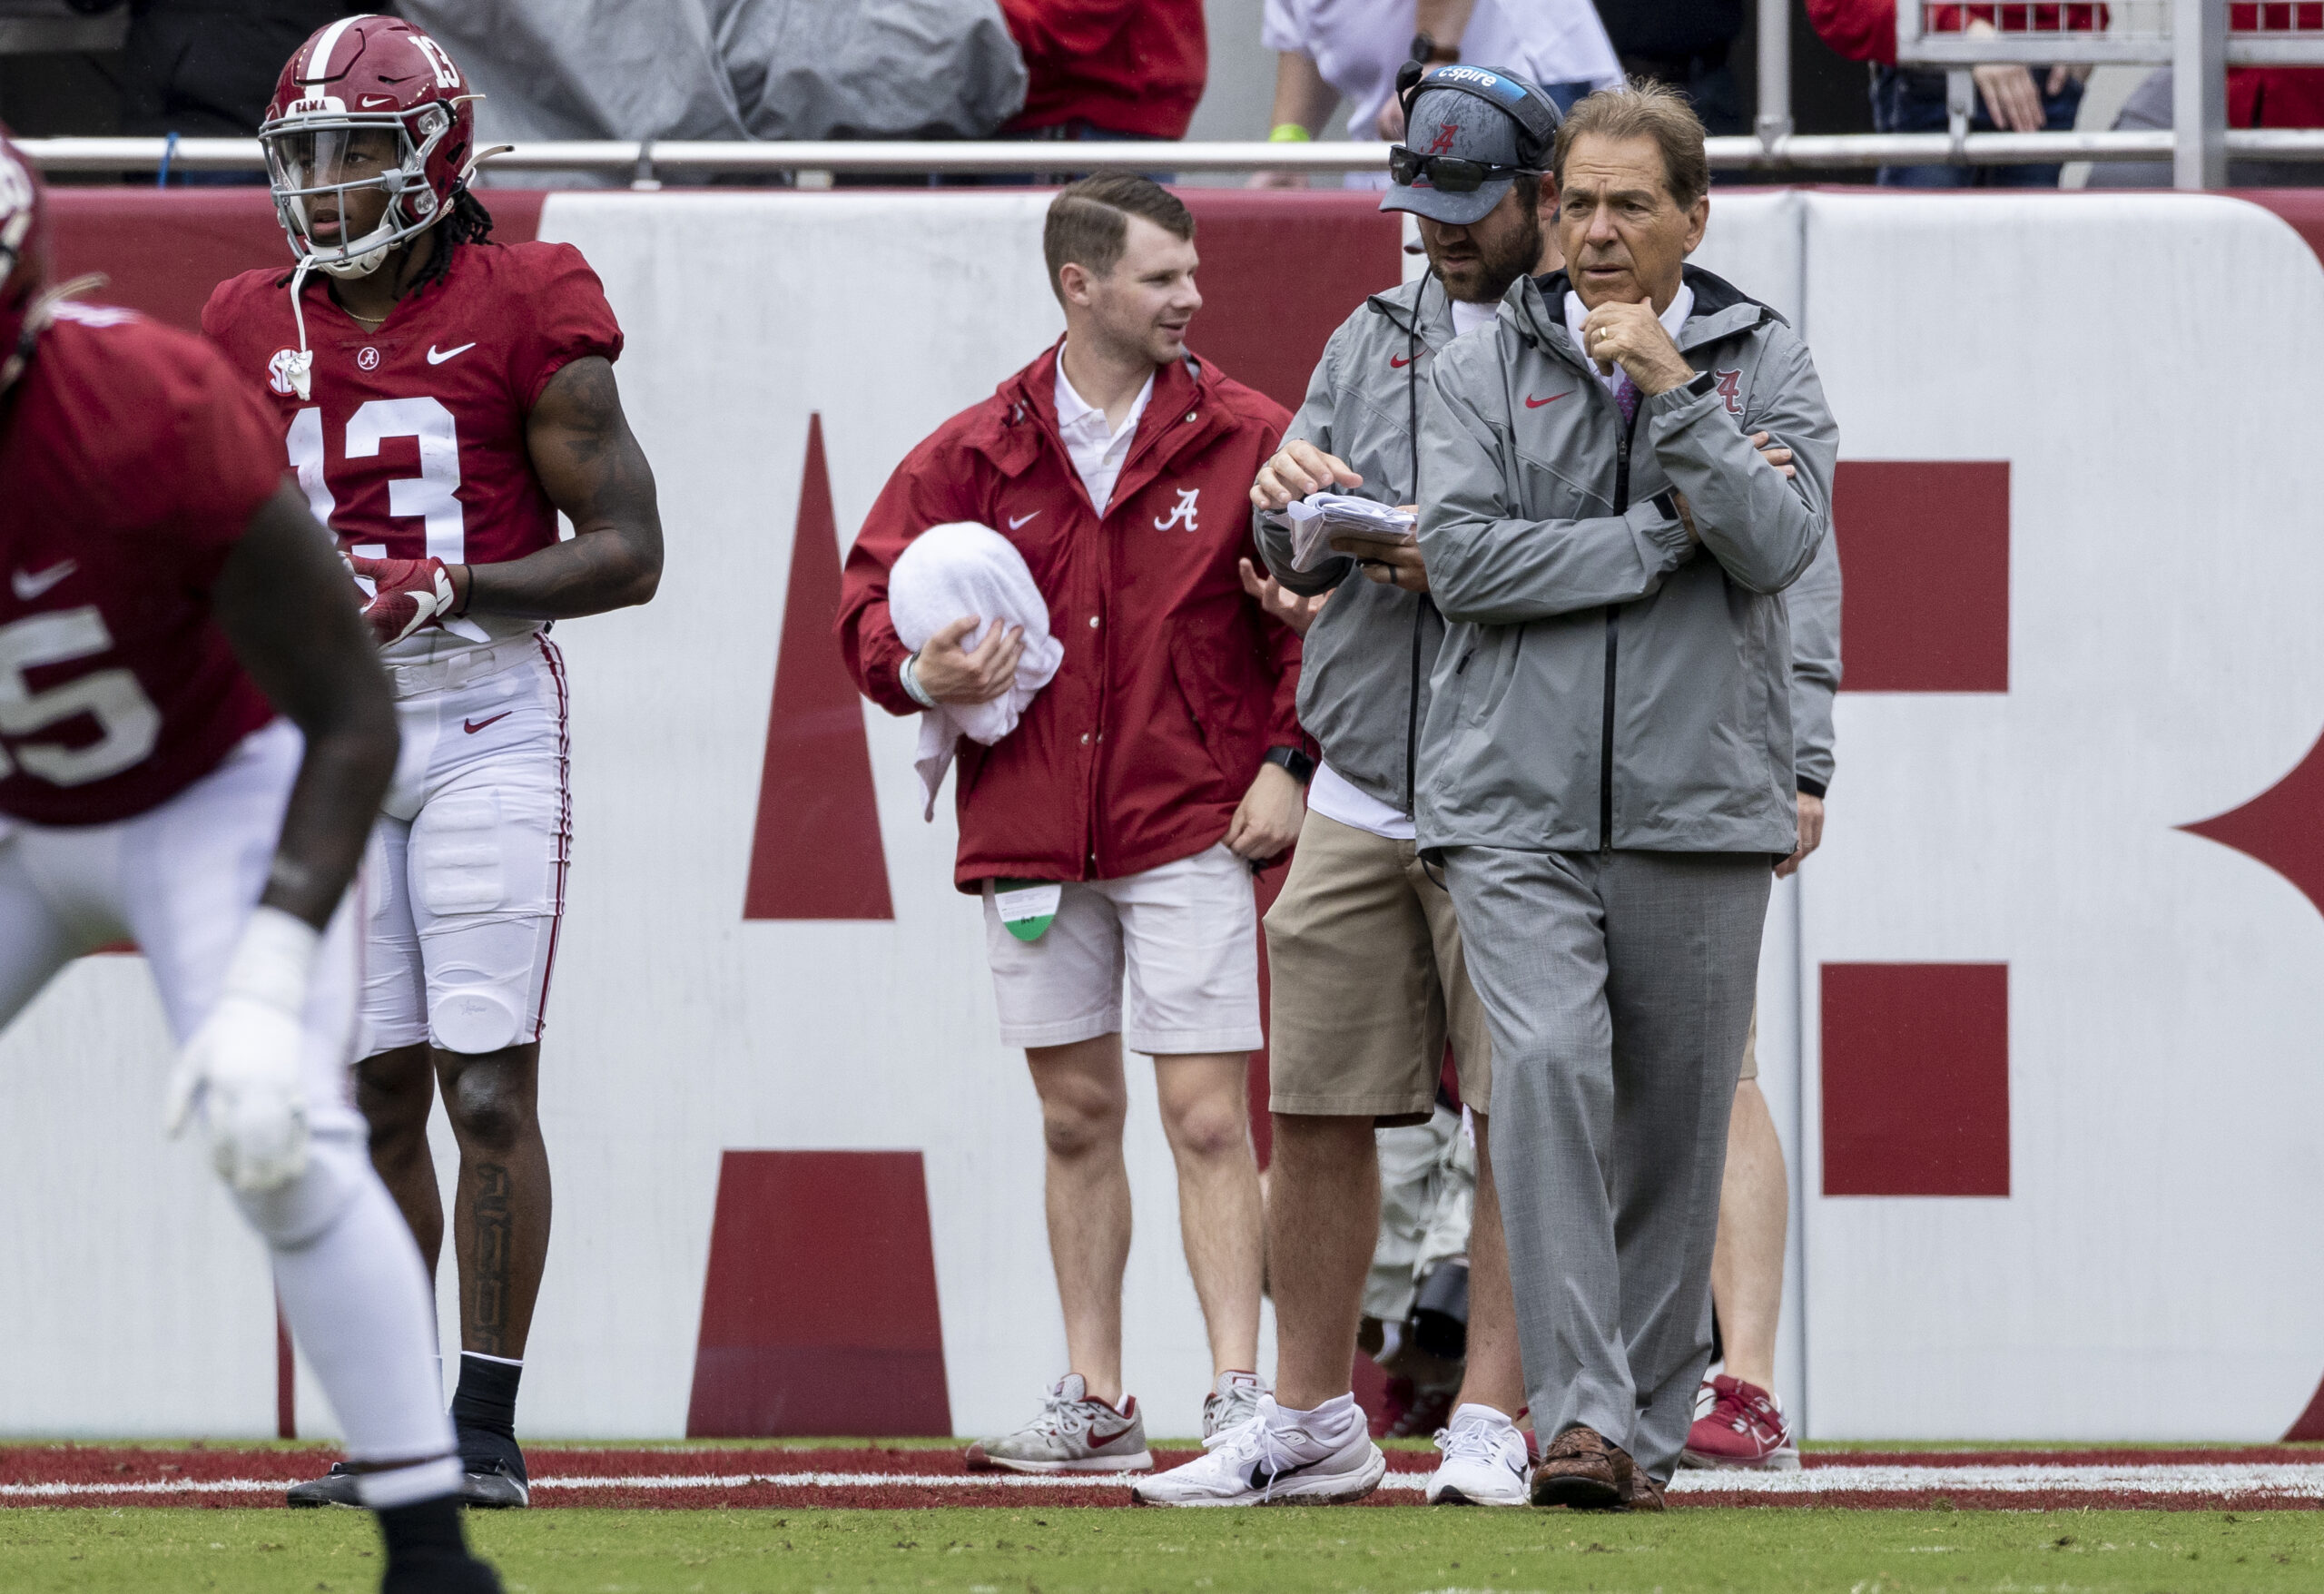 What we learned from Alabama’s second scrimmage of the spring